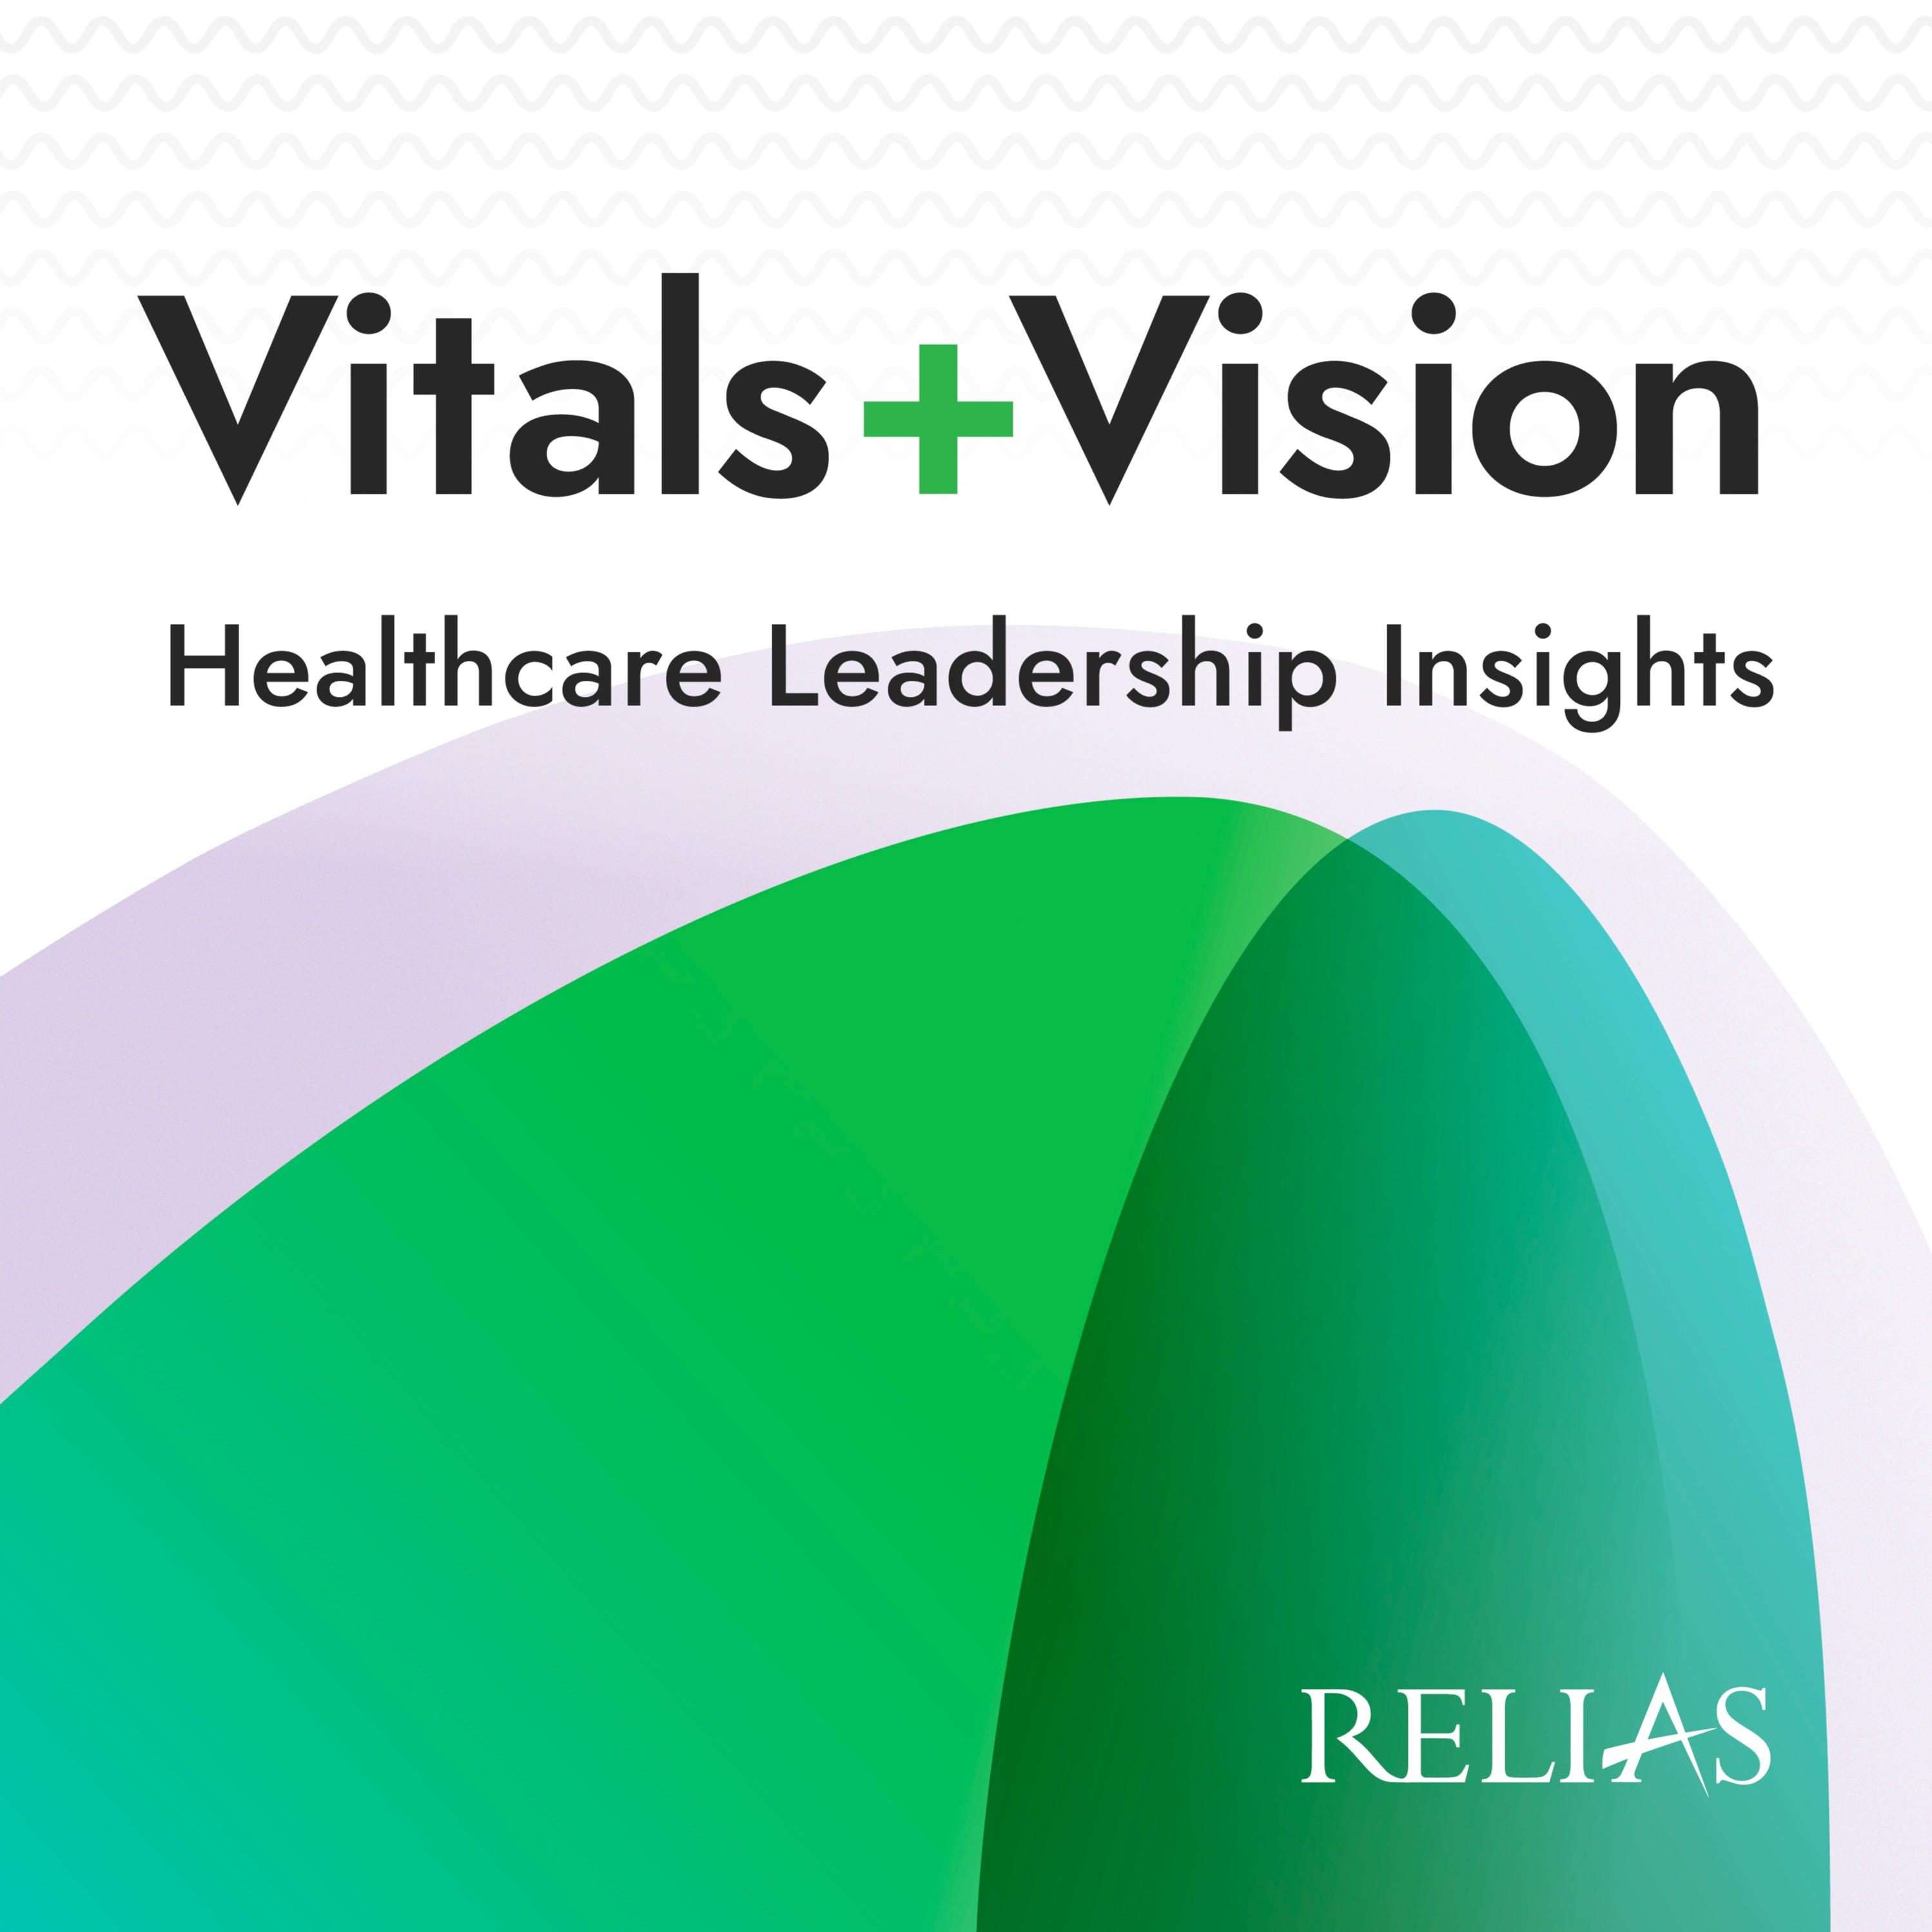 Vitals+Vision: Healthcare Leadership Insights With Relias